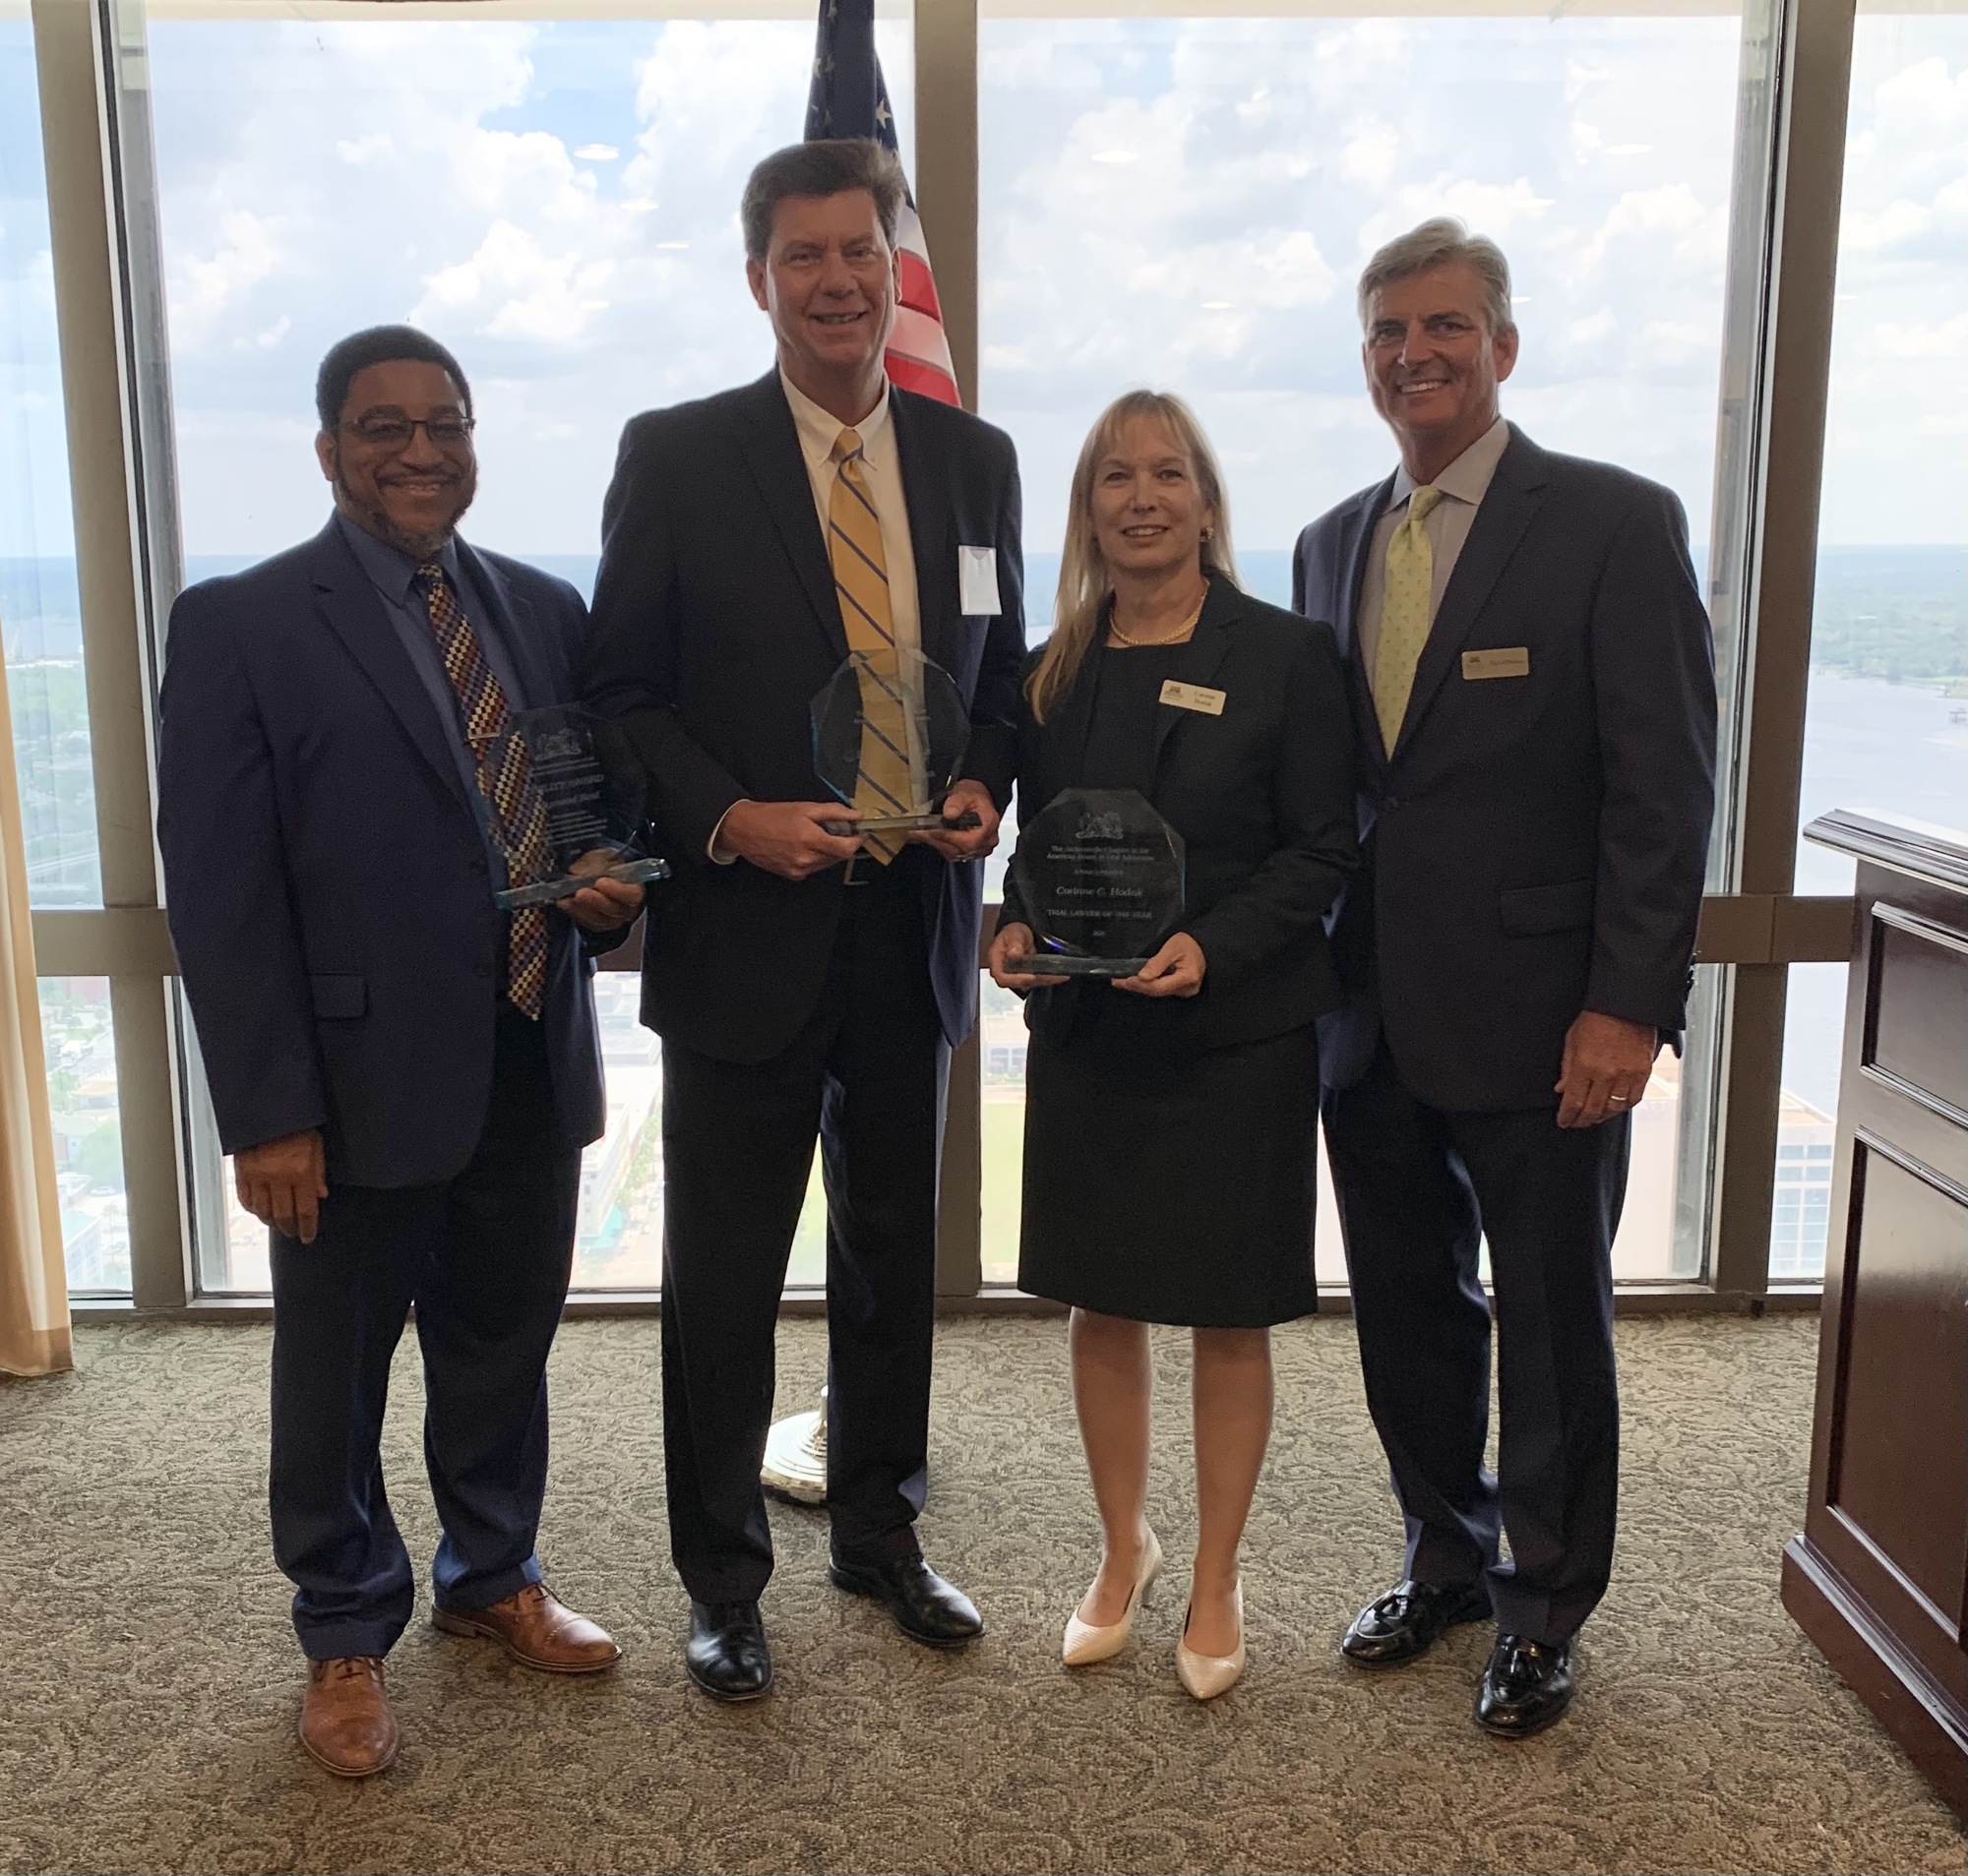 From left, Professionalism Award recipient Raymond Reid; 4th Circuit Judge Bruce Anderson, Jurist of the Year; Trial Lawyer of the Year Corrine Hodak; and chapter President David Dunlap.